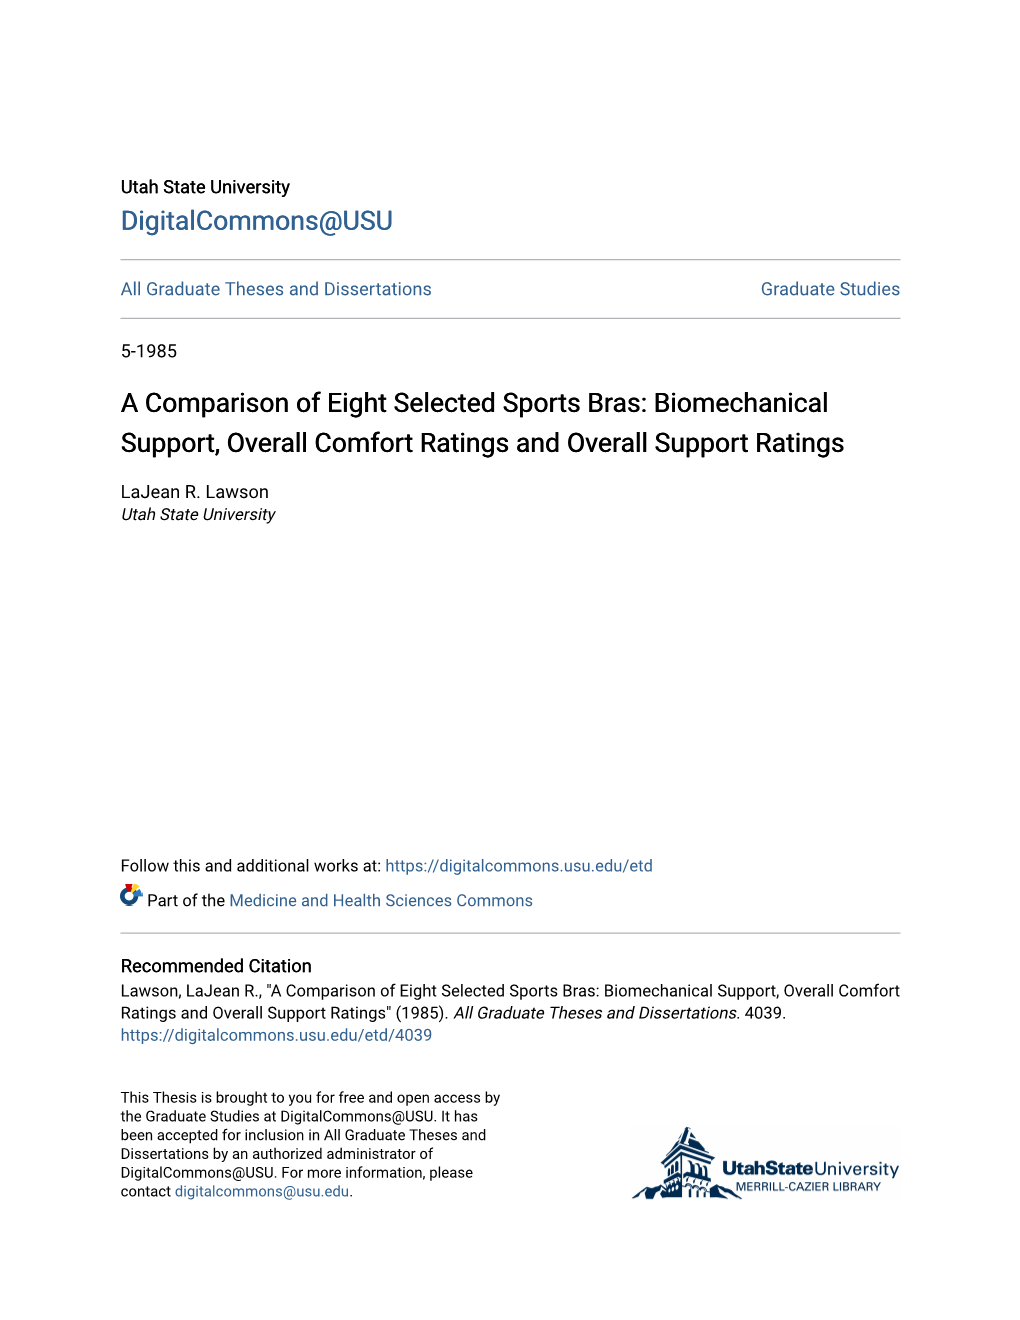 A Comparison of Eight Selected Sports Bras: Biomechanical Support, Overall Comfort Ratings and Overall Support Ratings